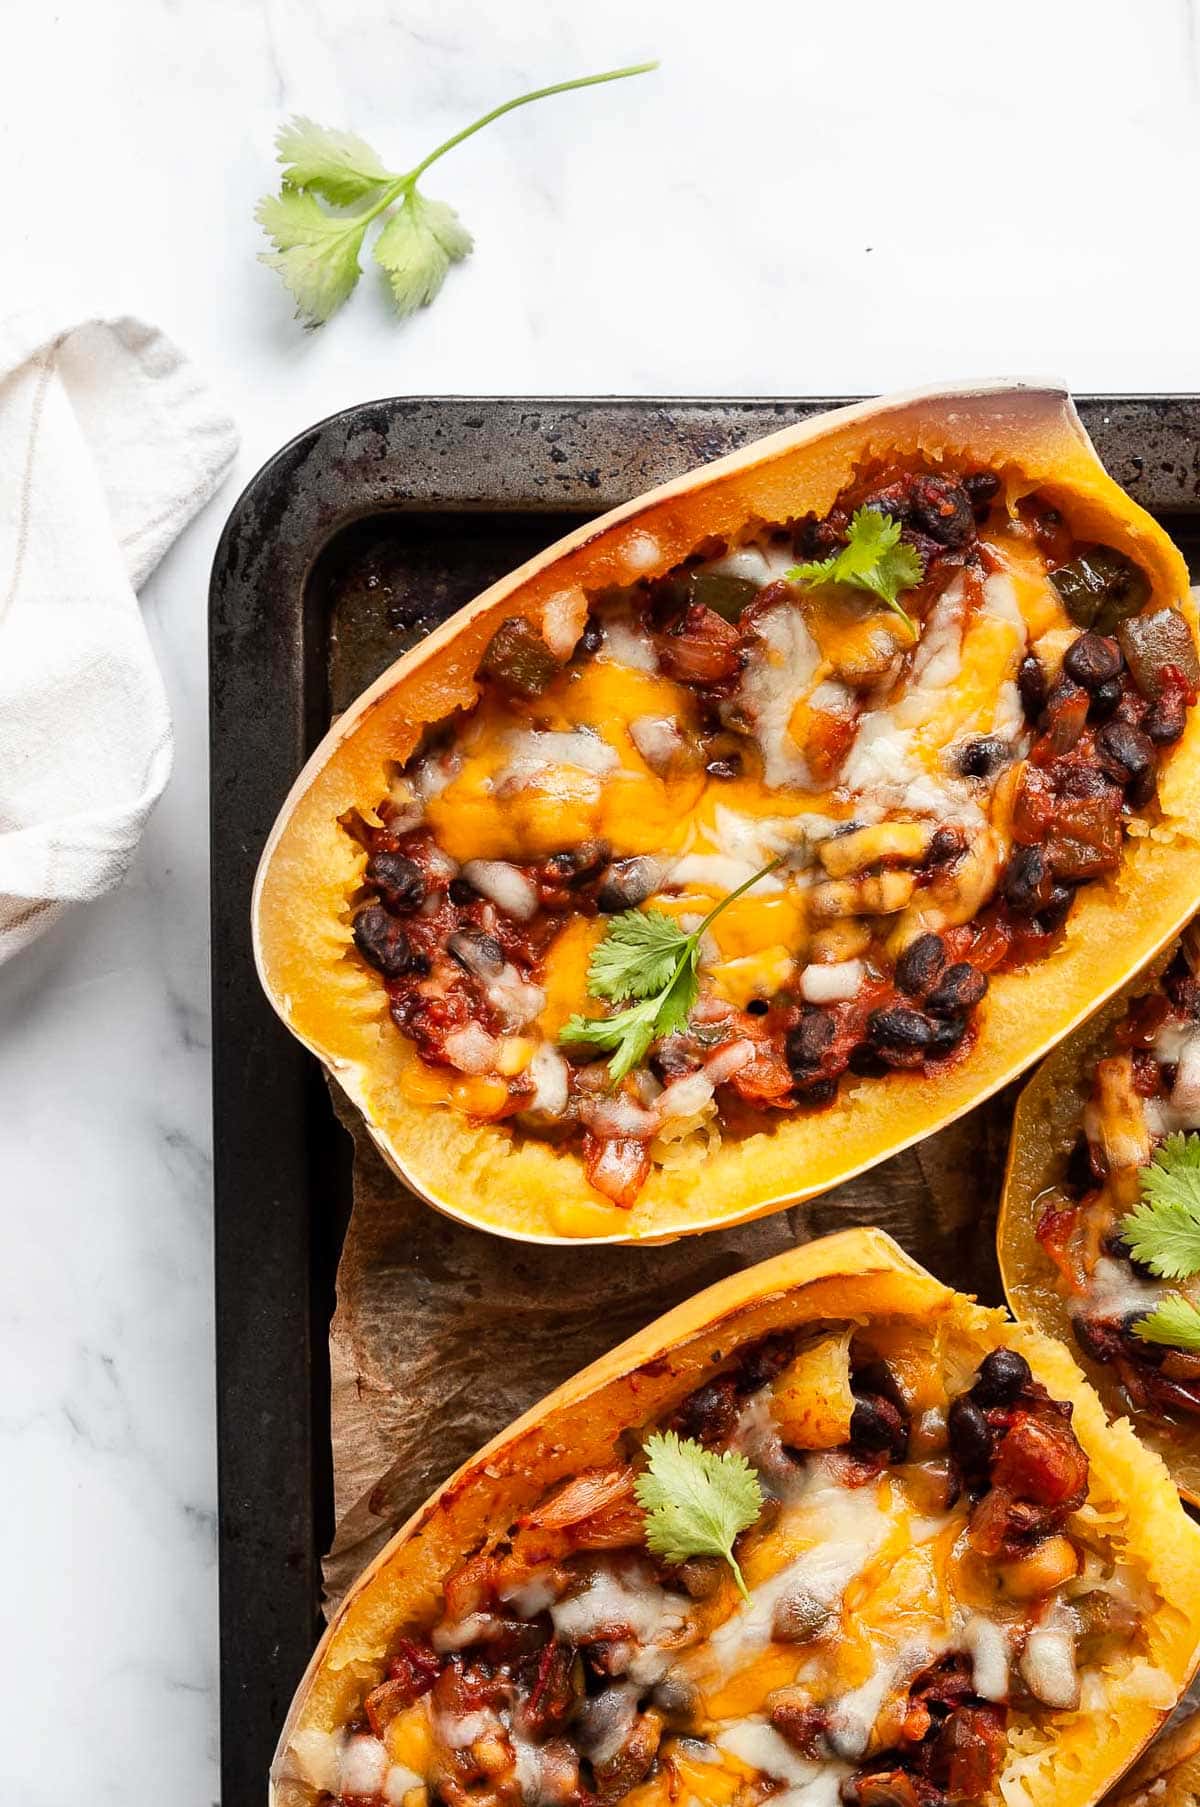 Tex Mex stuffed spaghetti squash halves on baking sheet lined with parchment paper.